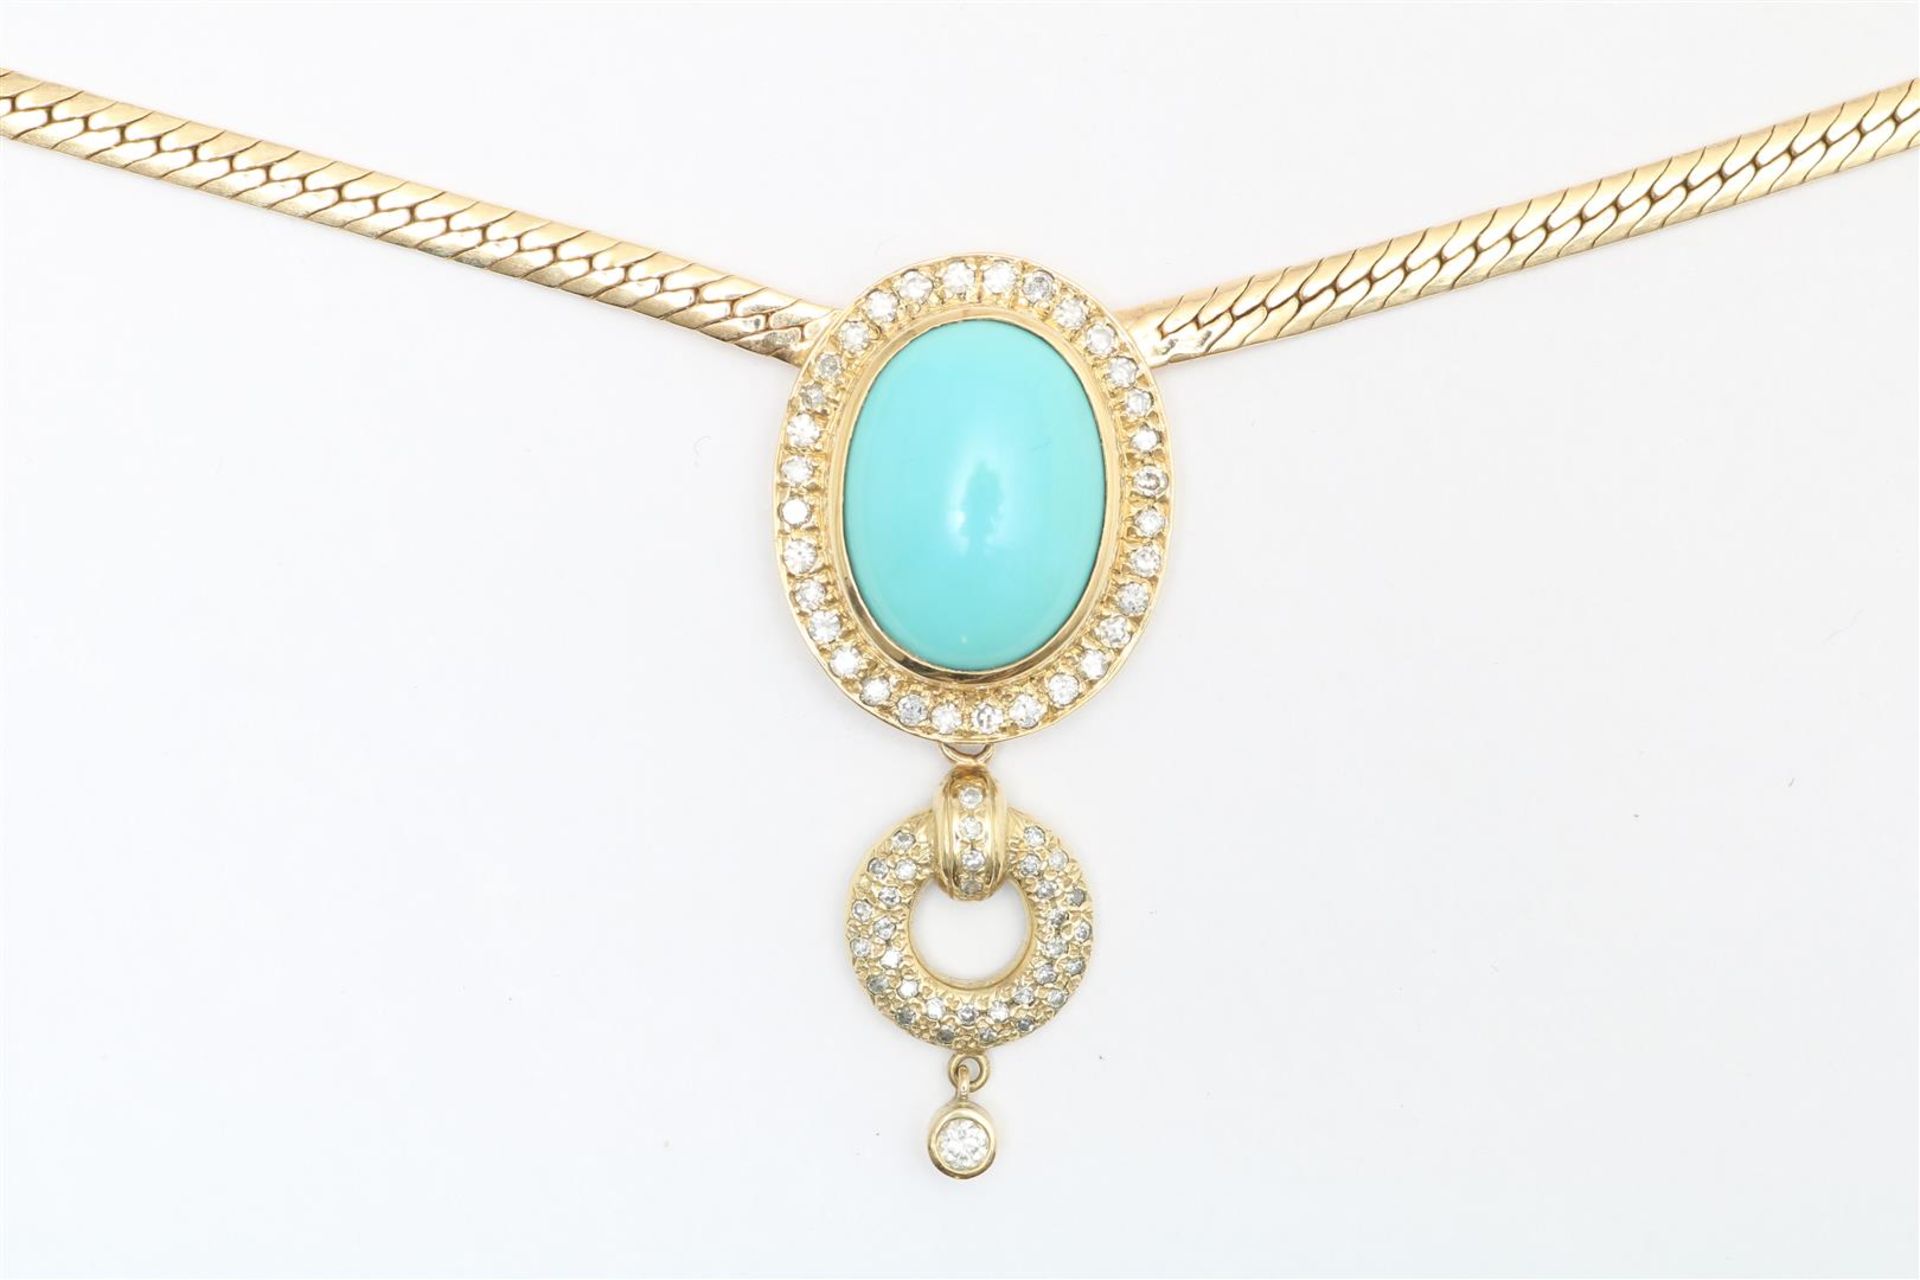 Gold necklace with a pendant set with turquoise and diamonds